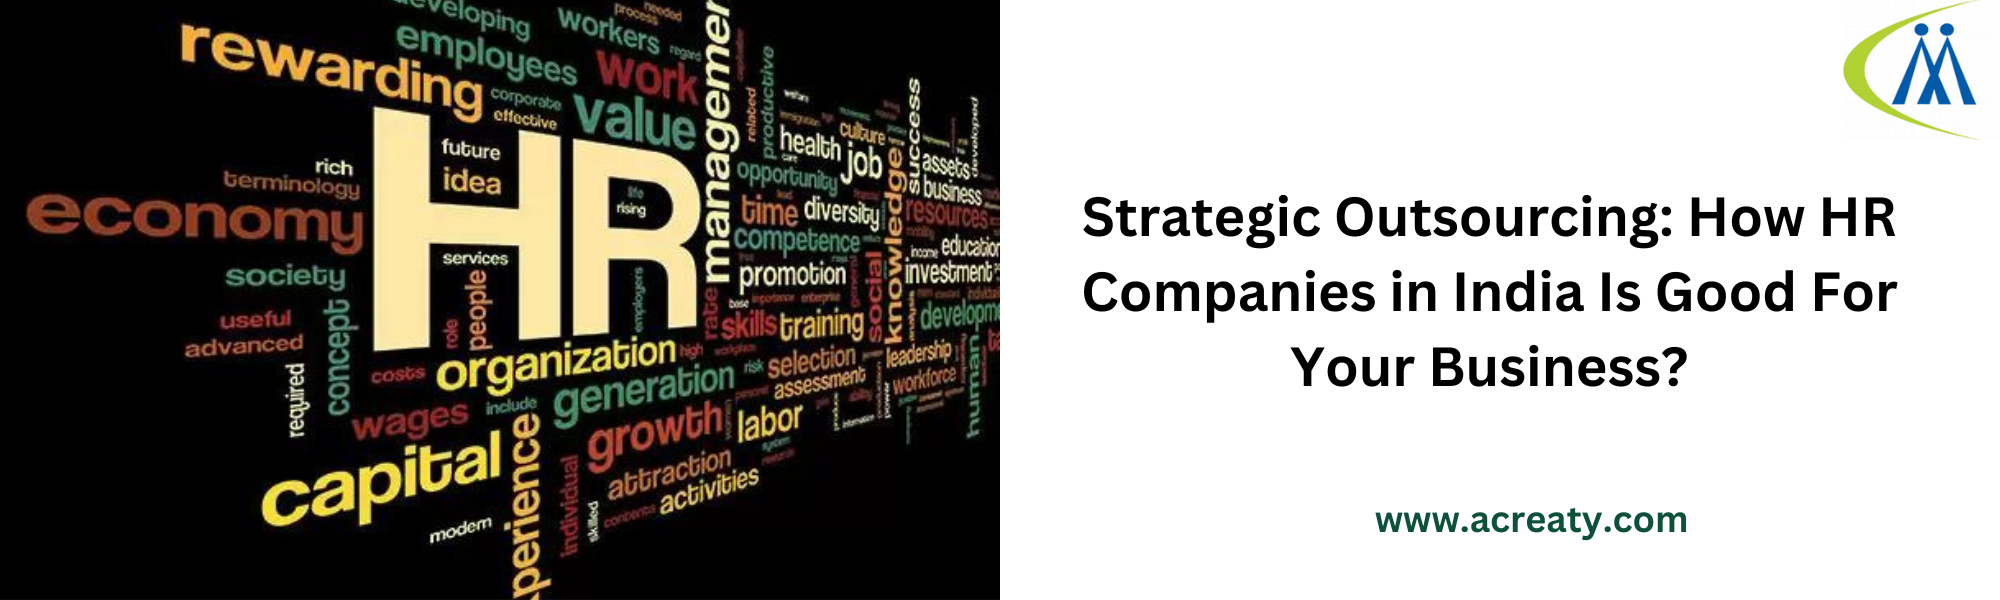 Strategic Outsourcing: How HR Companies in India Is Good For Your Business?